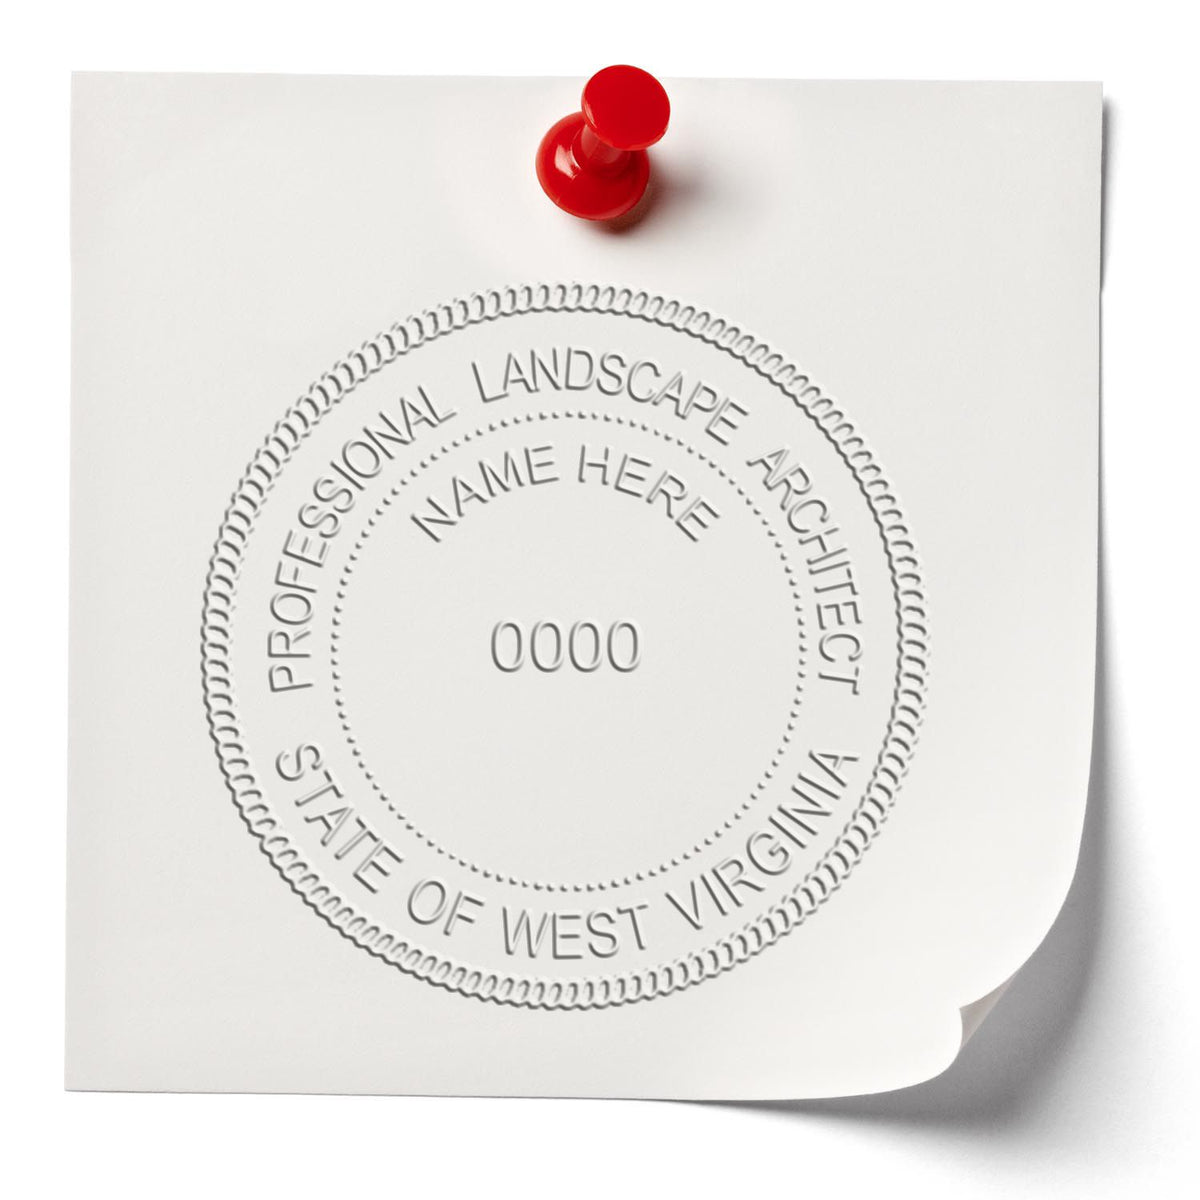 An in use photo of the Hybrid West Virginia Landscape Architect Seal showing a sample imprint on a cardstock